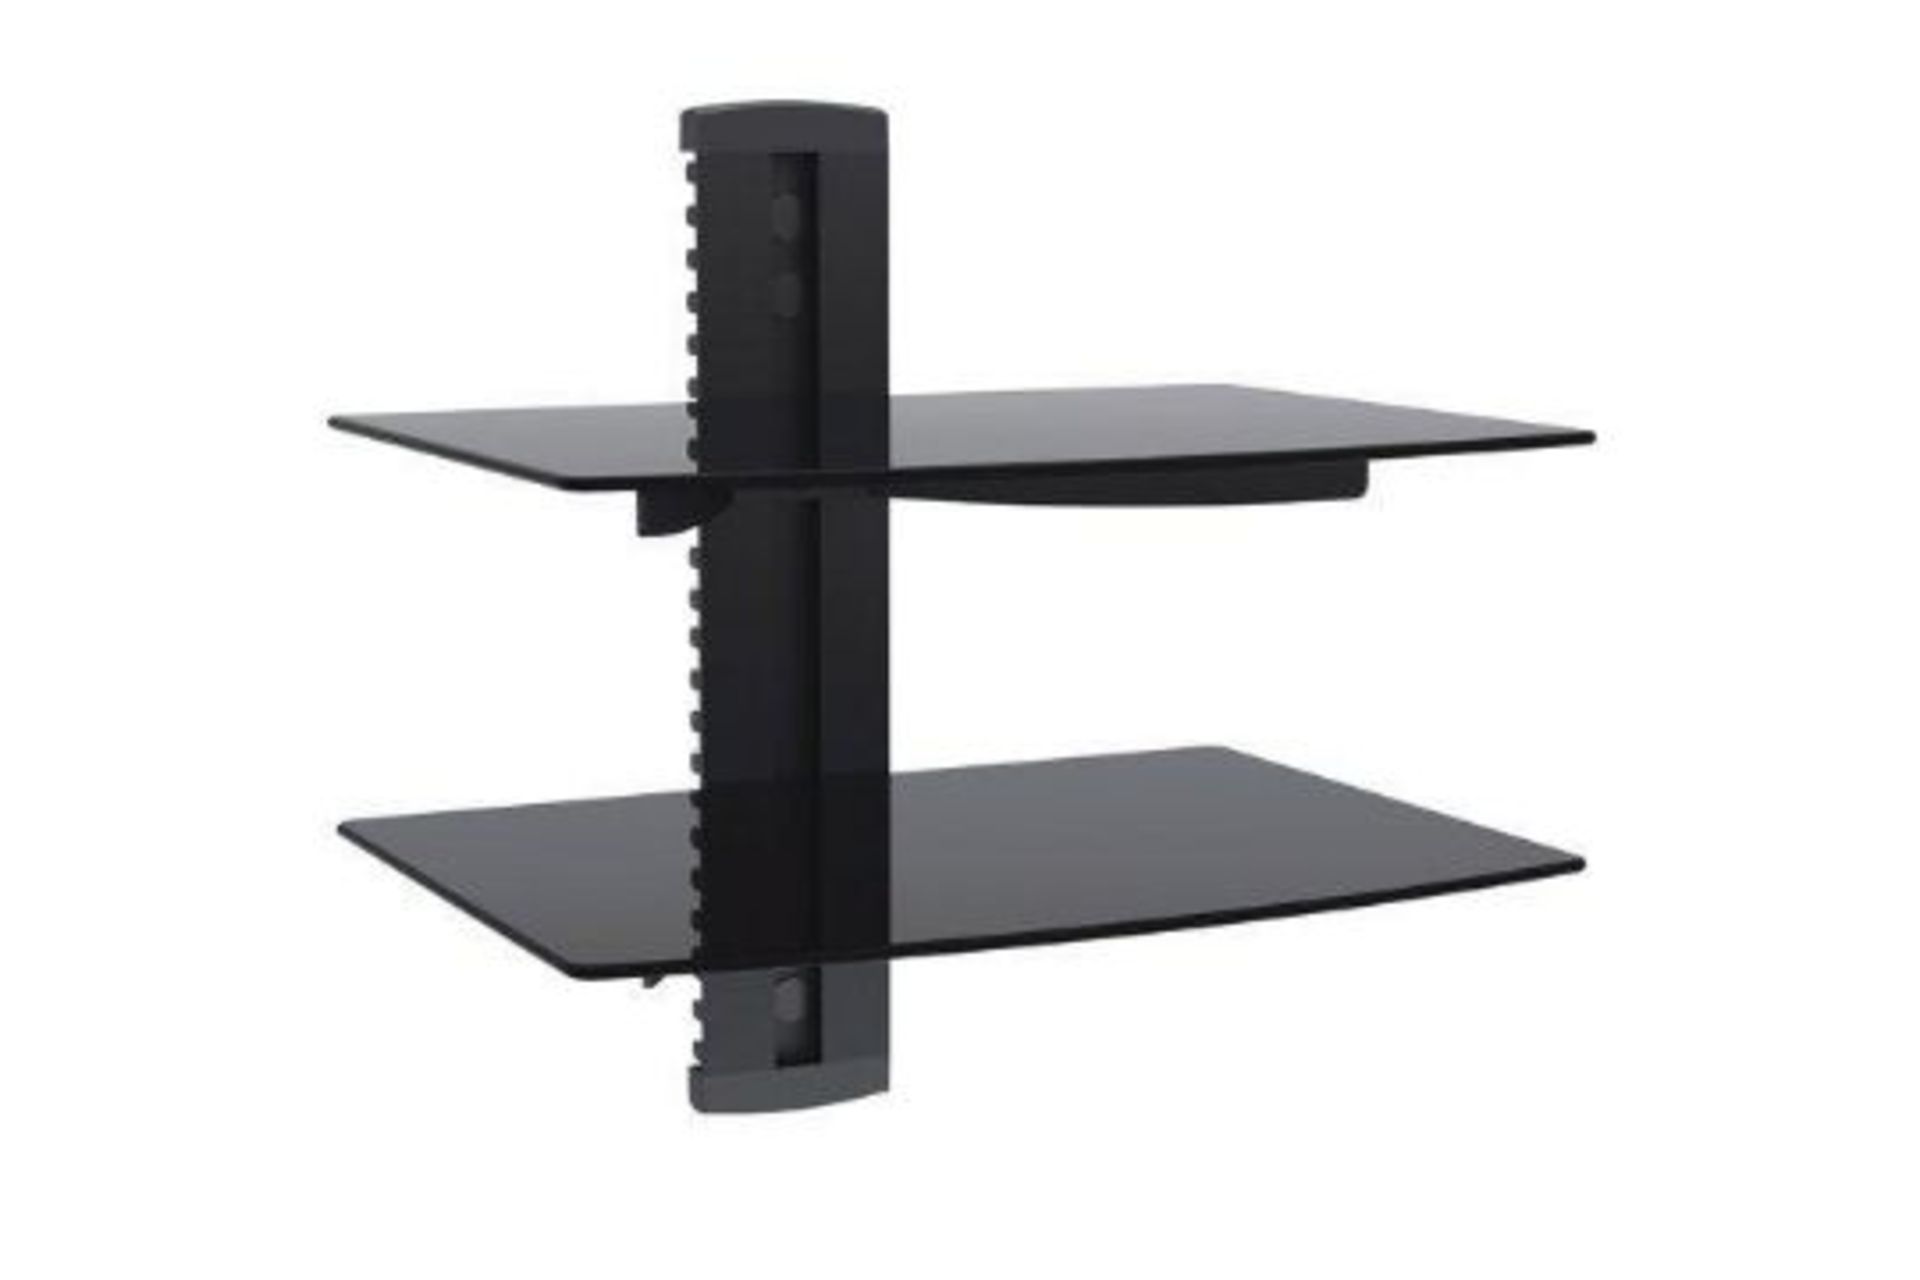 2 X Floating Shelf - (SR3 2.1)Floating Glass ShelvesHost your entertainment devices with style and